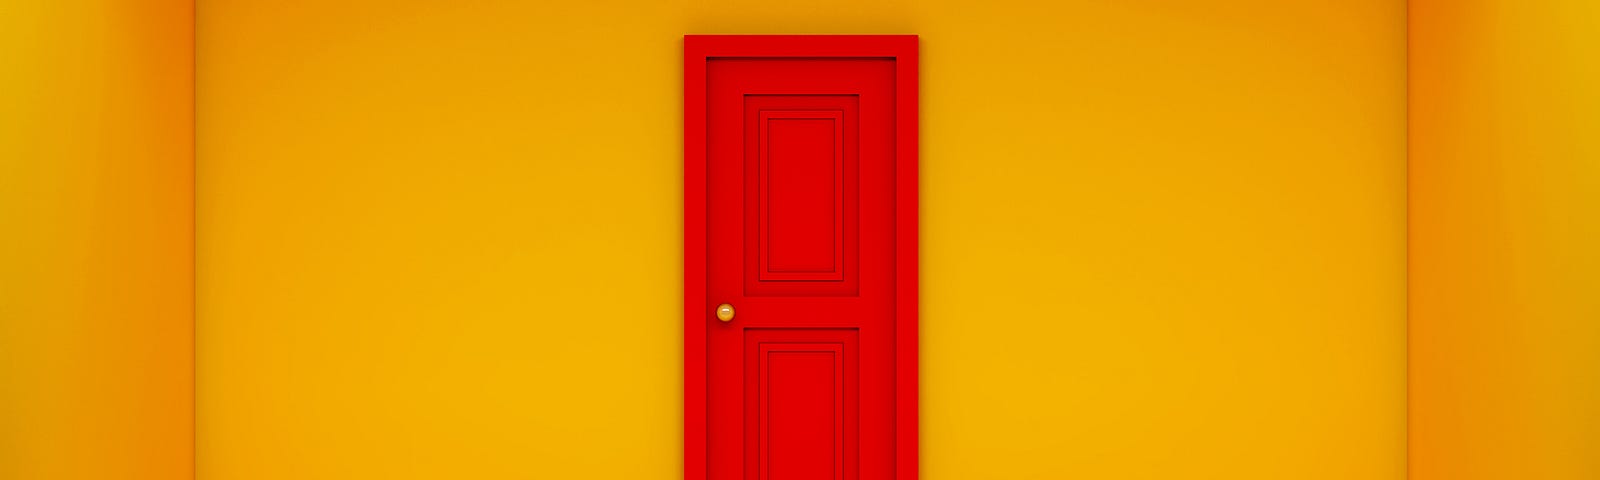 A photo of a red door in an empty room with bright yellow walls.